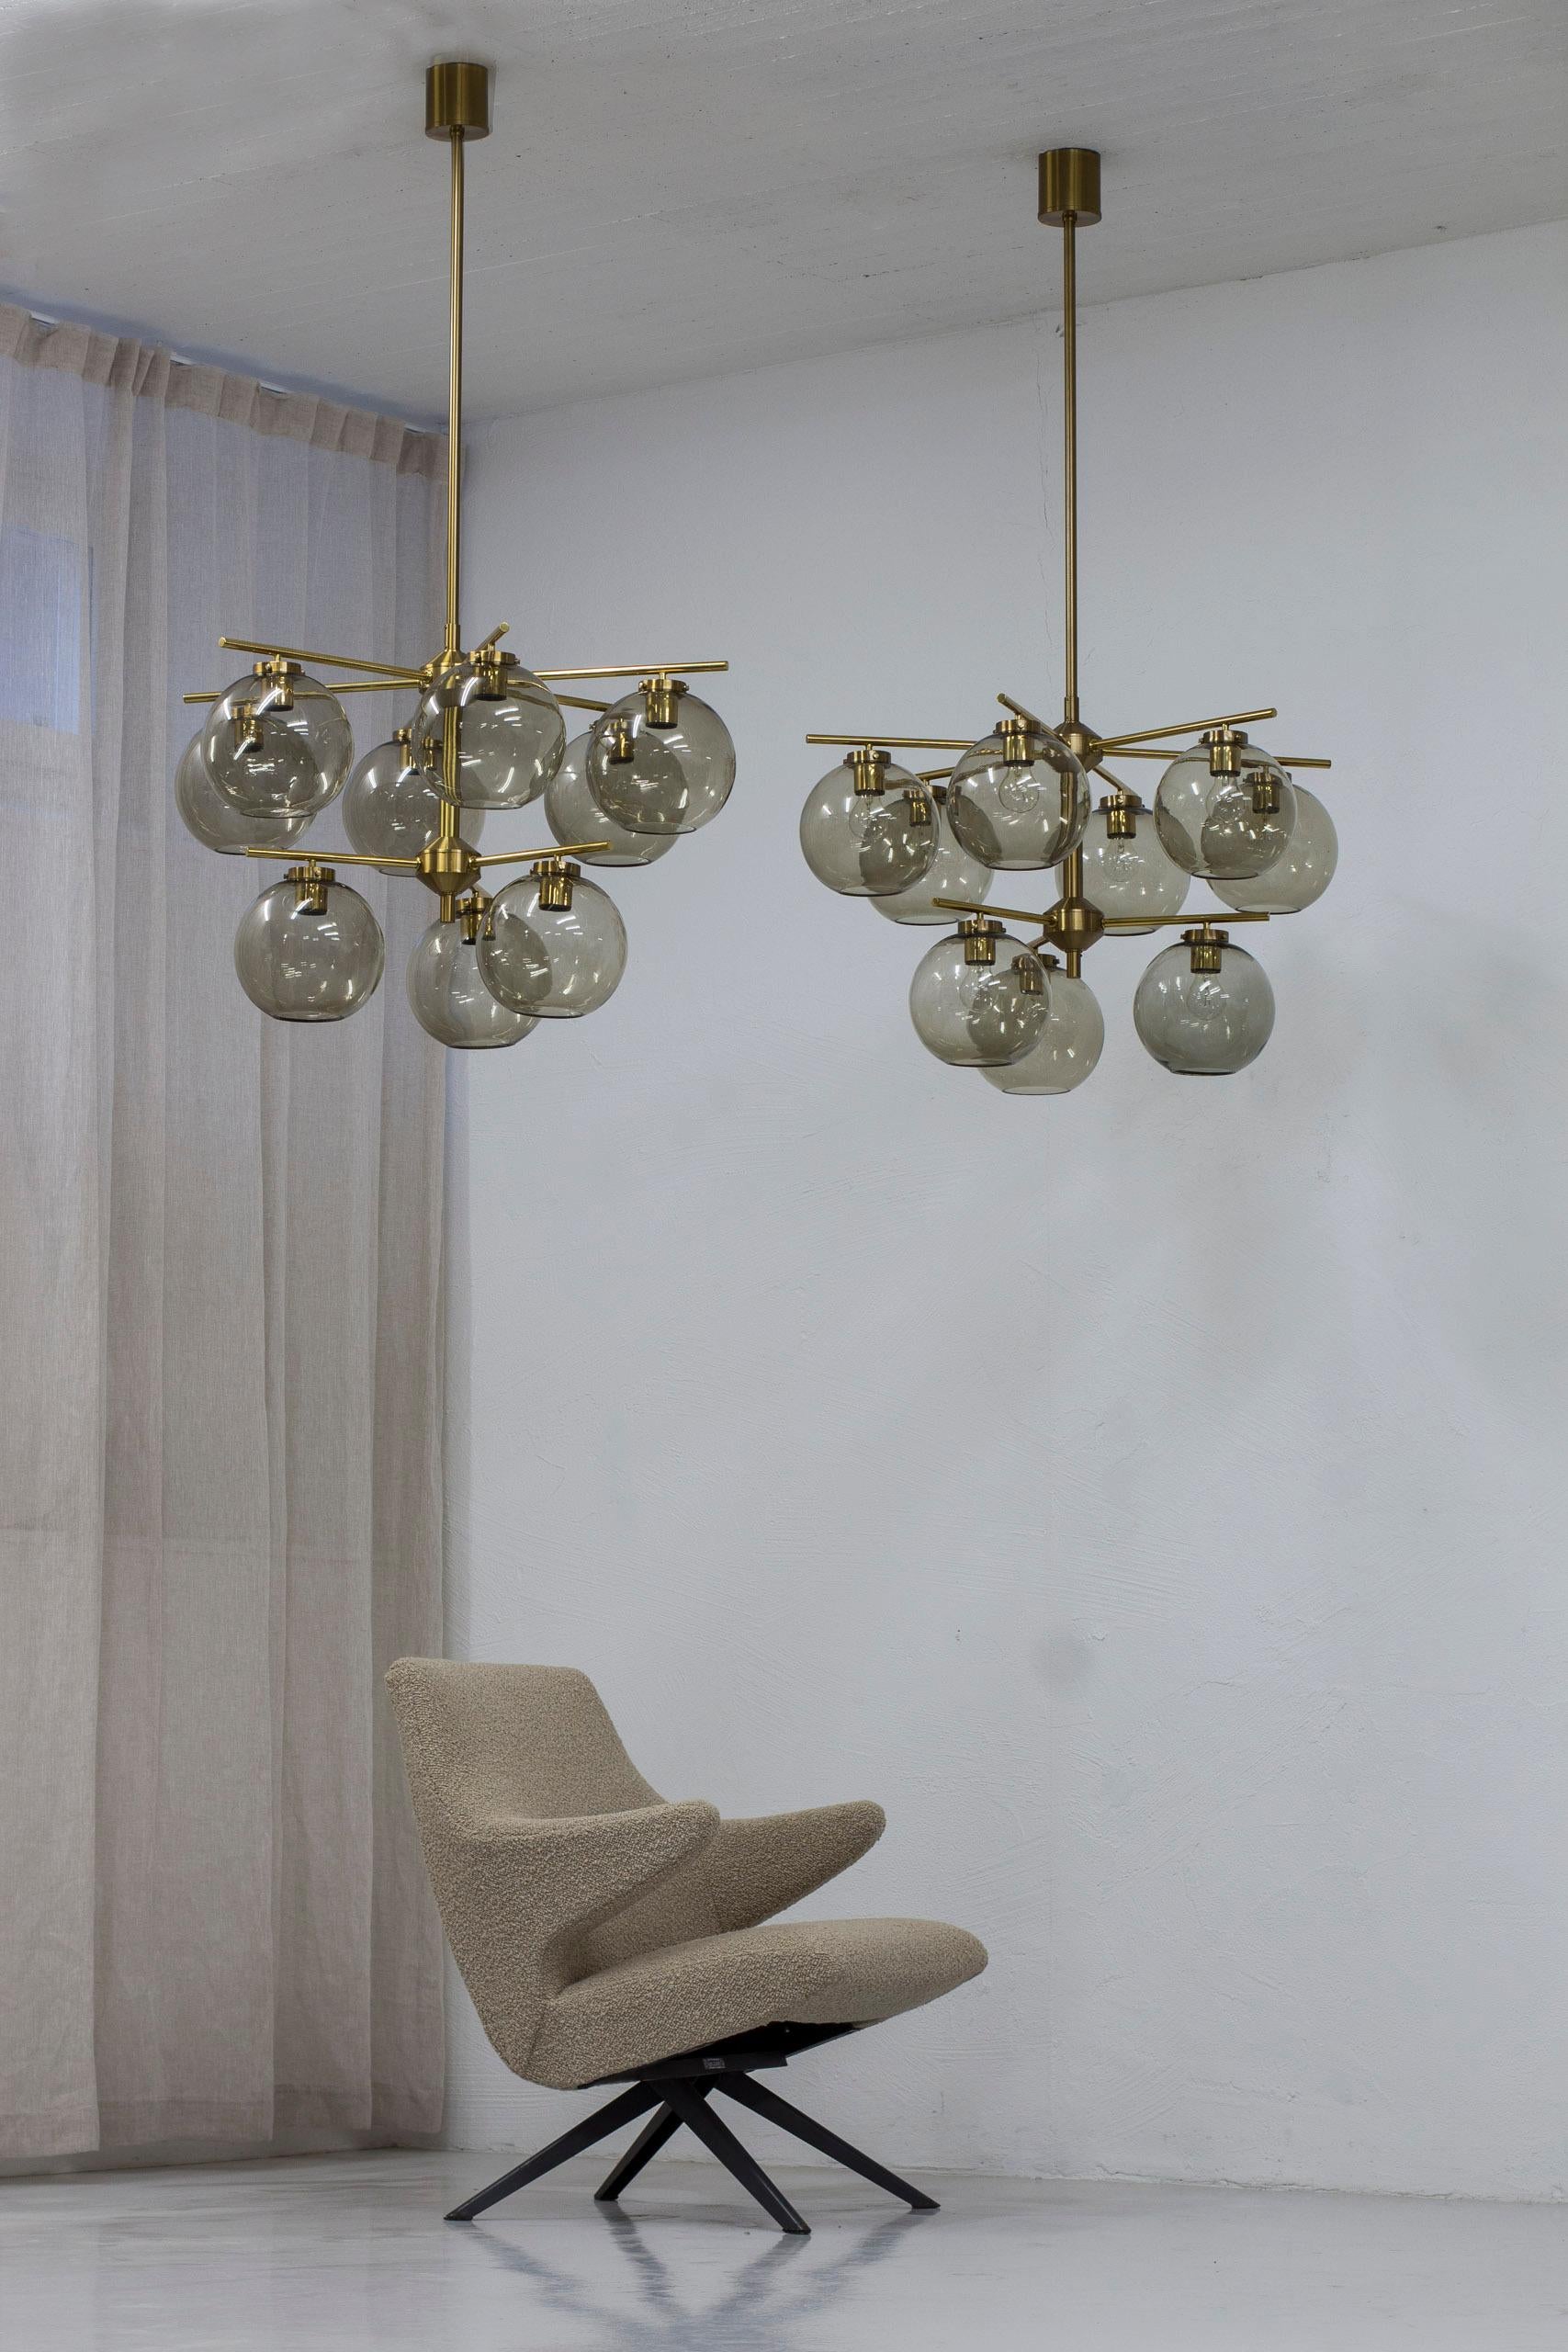 Swedish Brass and smoked glass chandeliers by Holger Johansson, Sweden, 1960s